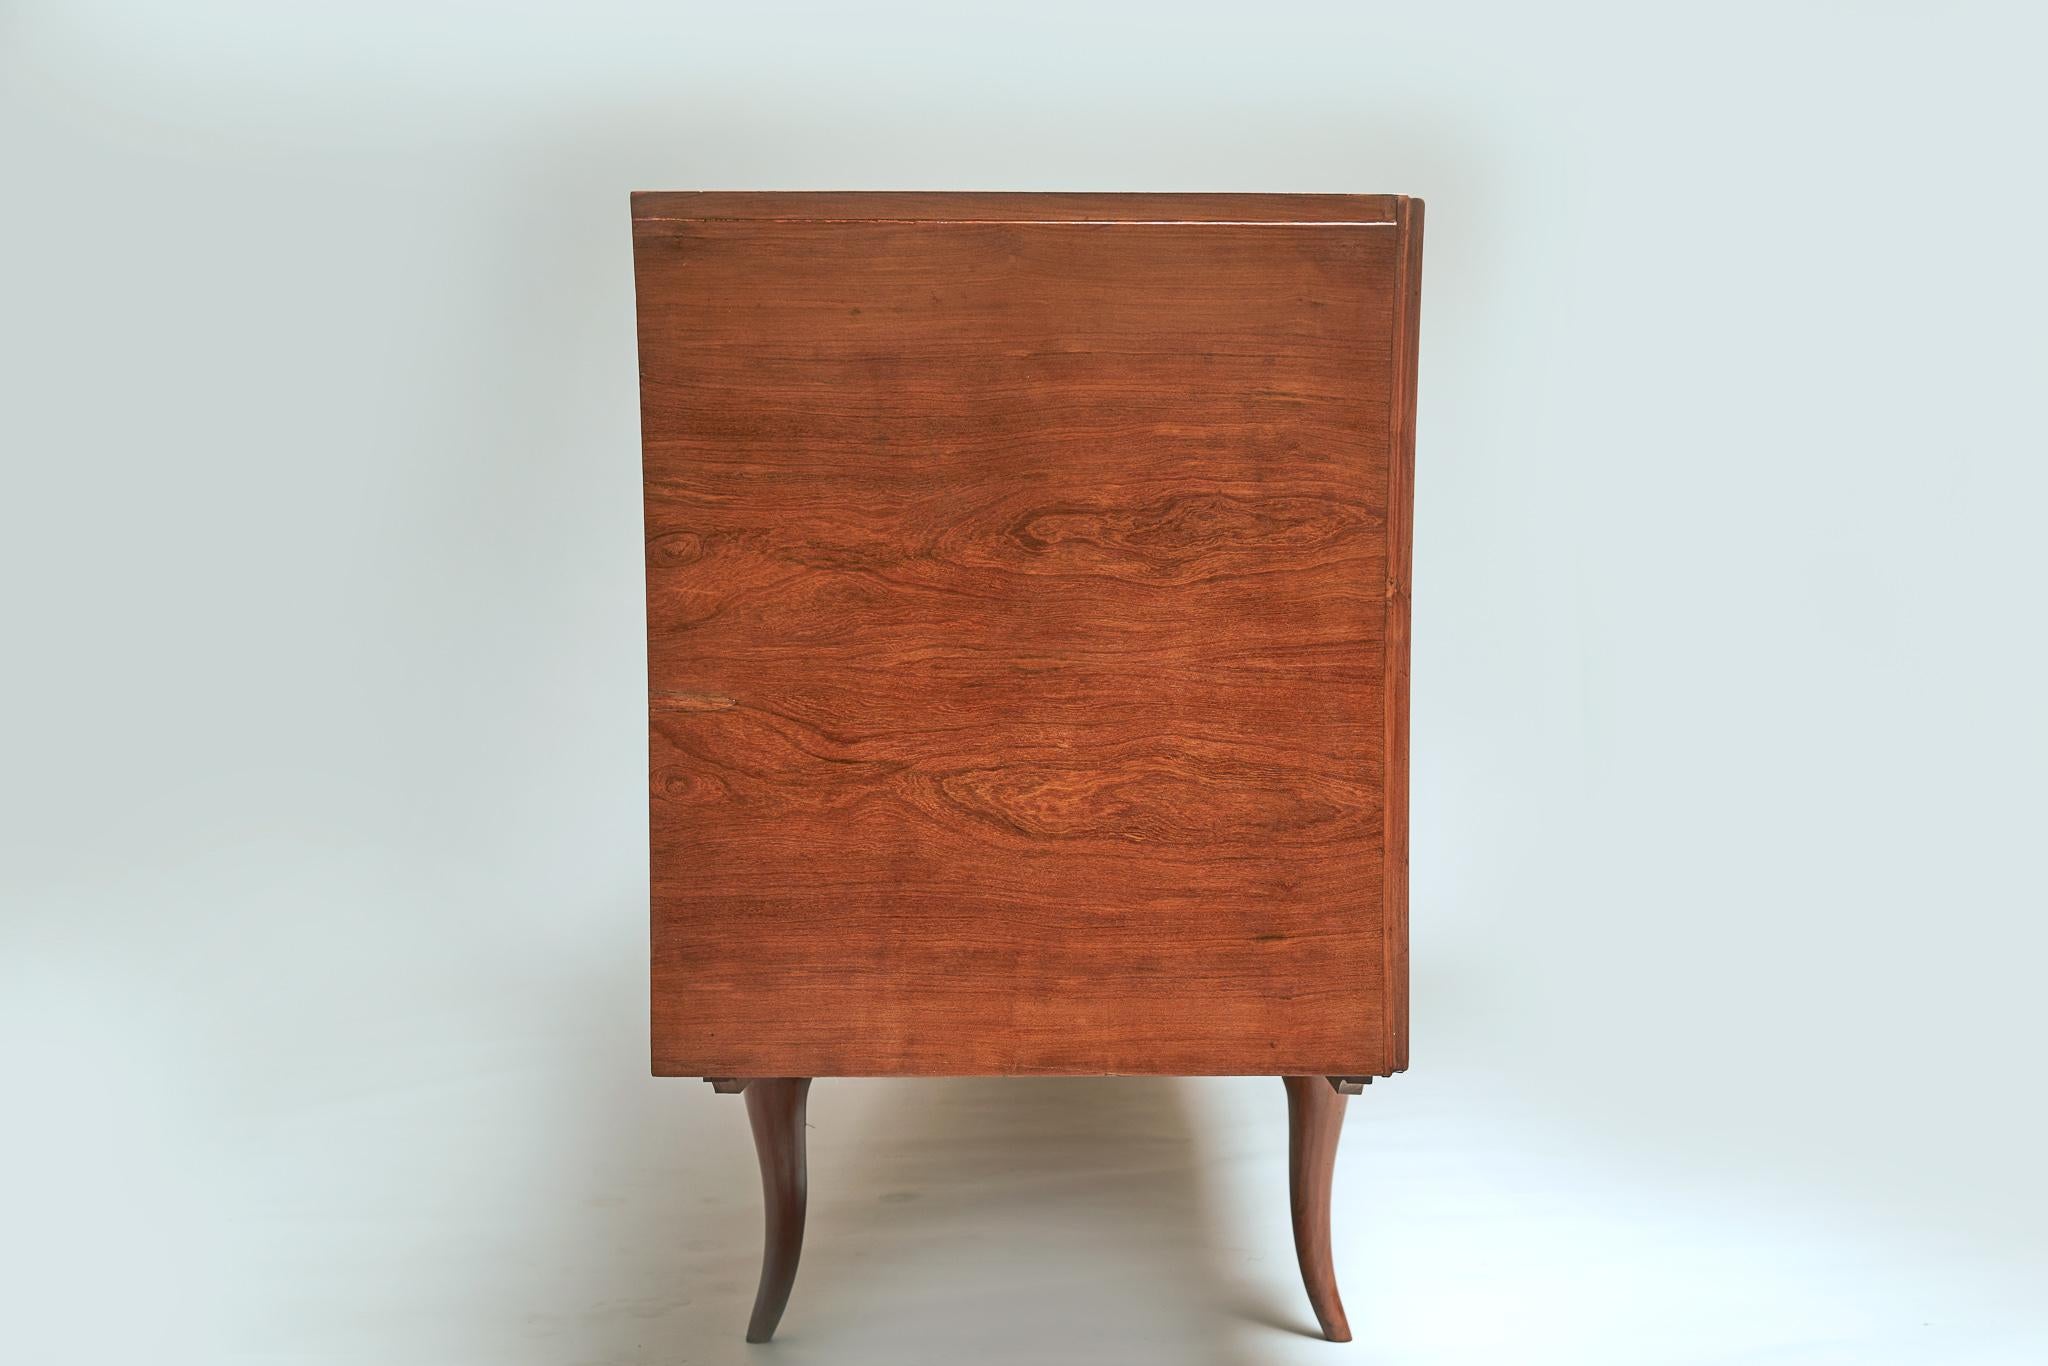 Mid-Century Modern Credenza in Caviuna Hardwood by Giuseppe Scapinelli, 1956 For Sale 8